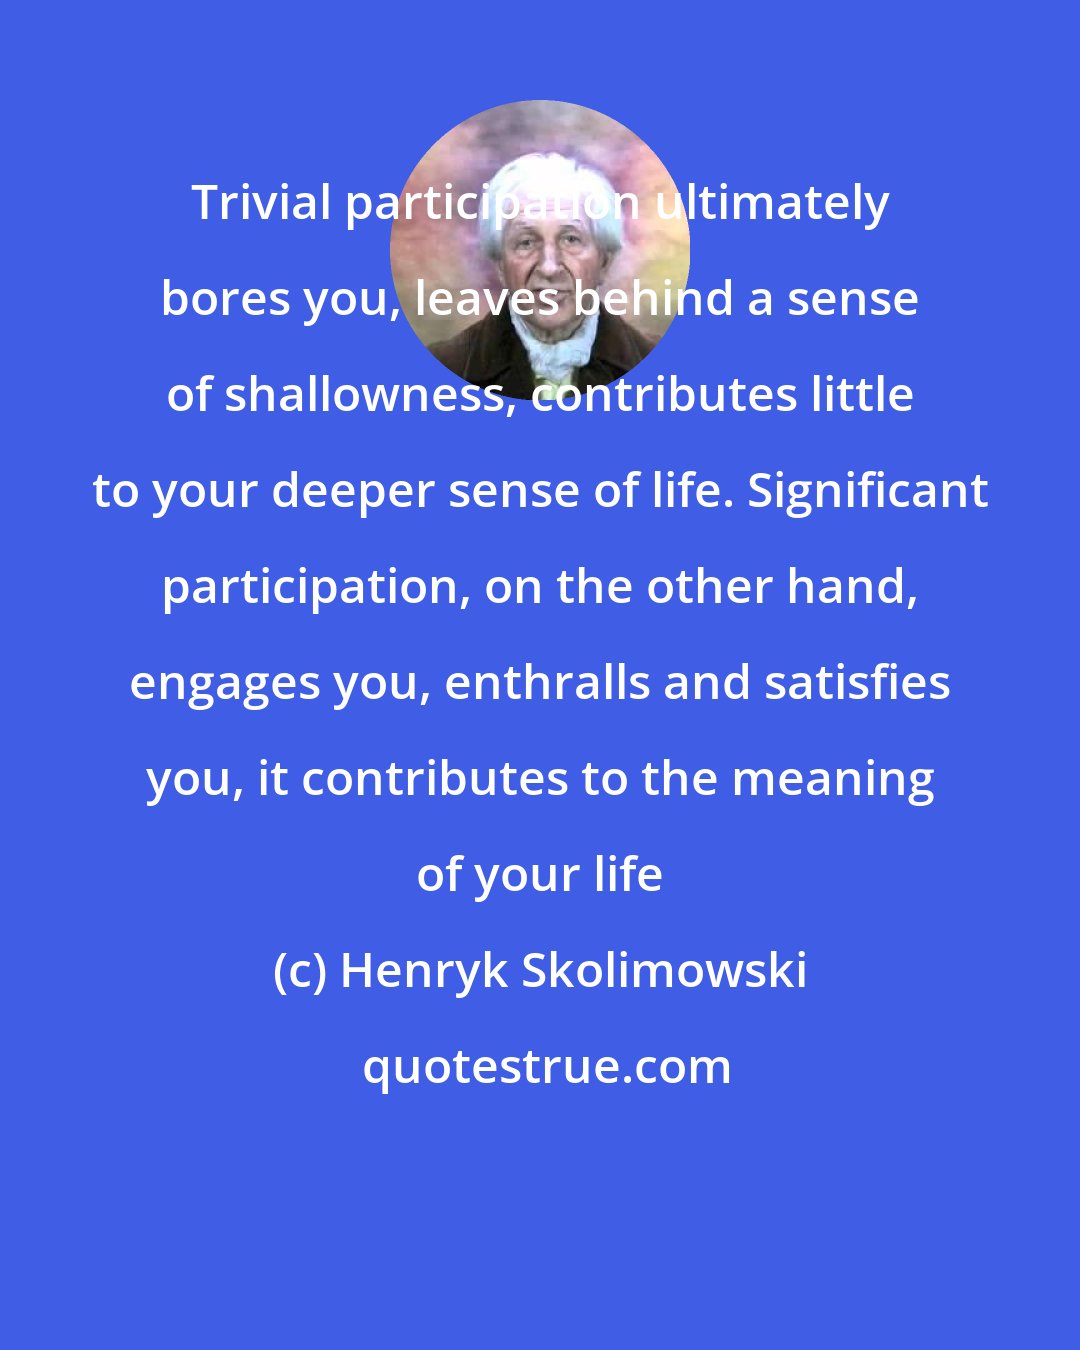 Henryk Skolimowski: Trivial participation ultimately bores you, leaves behind a sense of shallowness, contributes little to your deeper sense of life. Significant participation, on the other hand, engages you, enthralls and satisfies you, it contributes to the meaning of your life